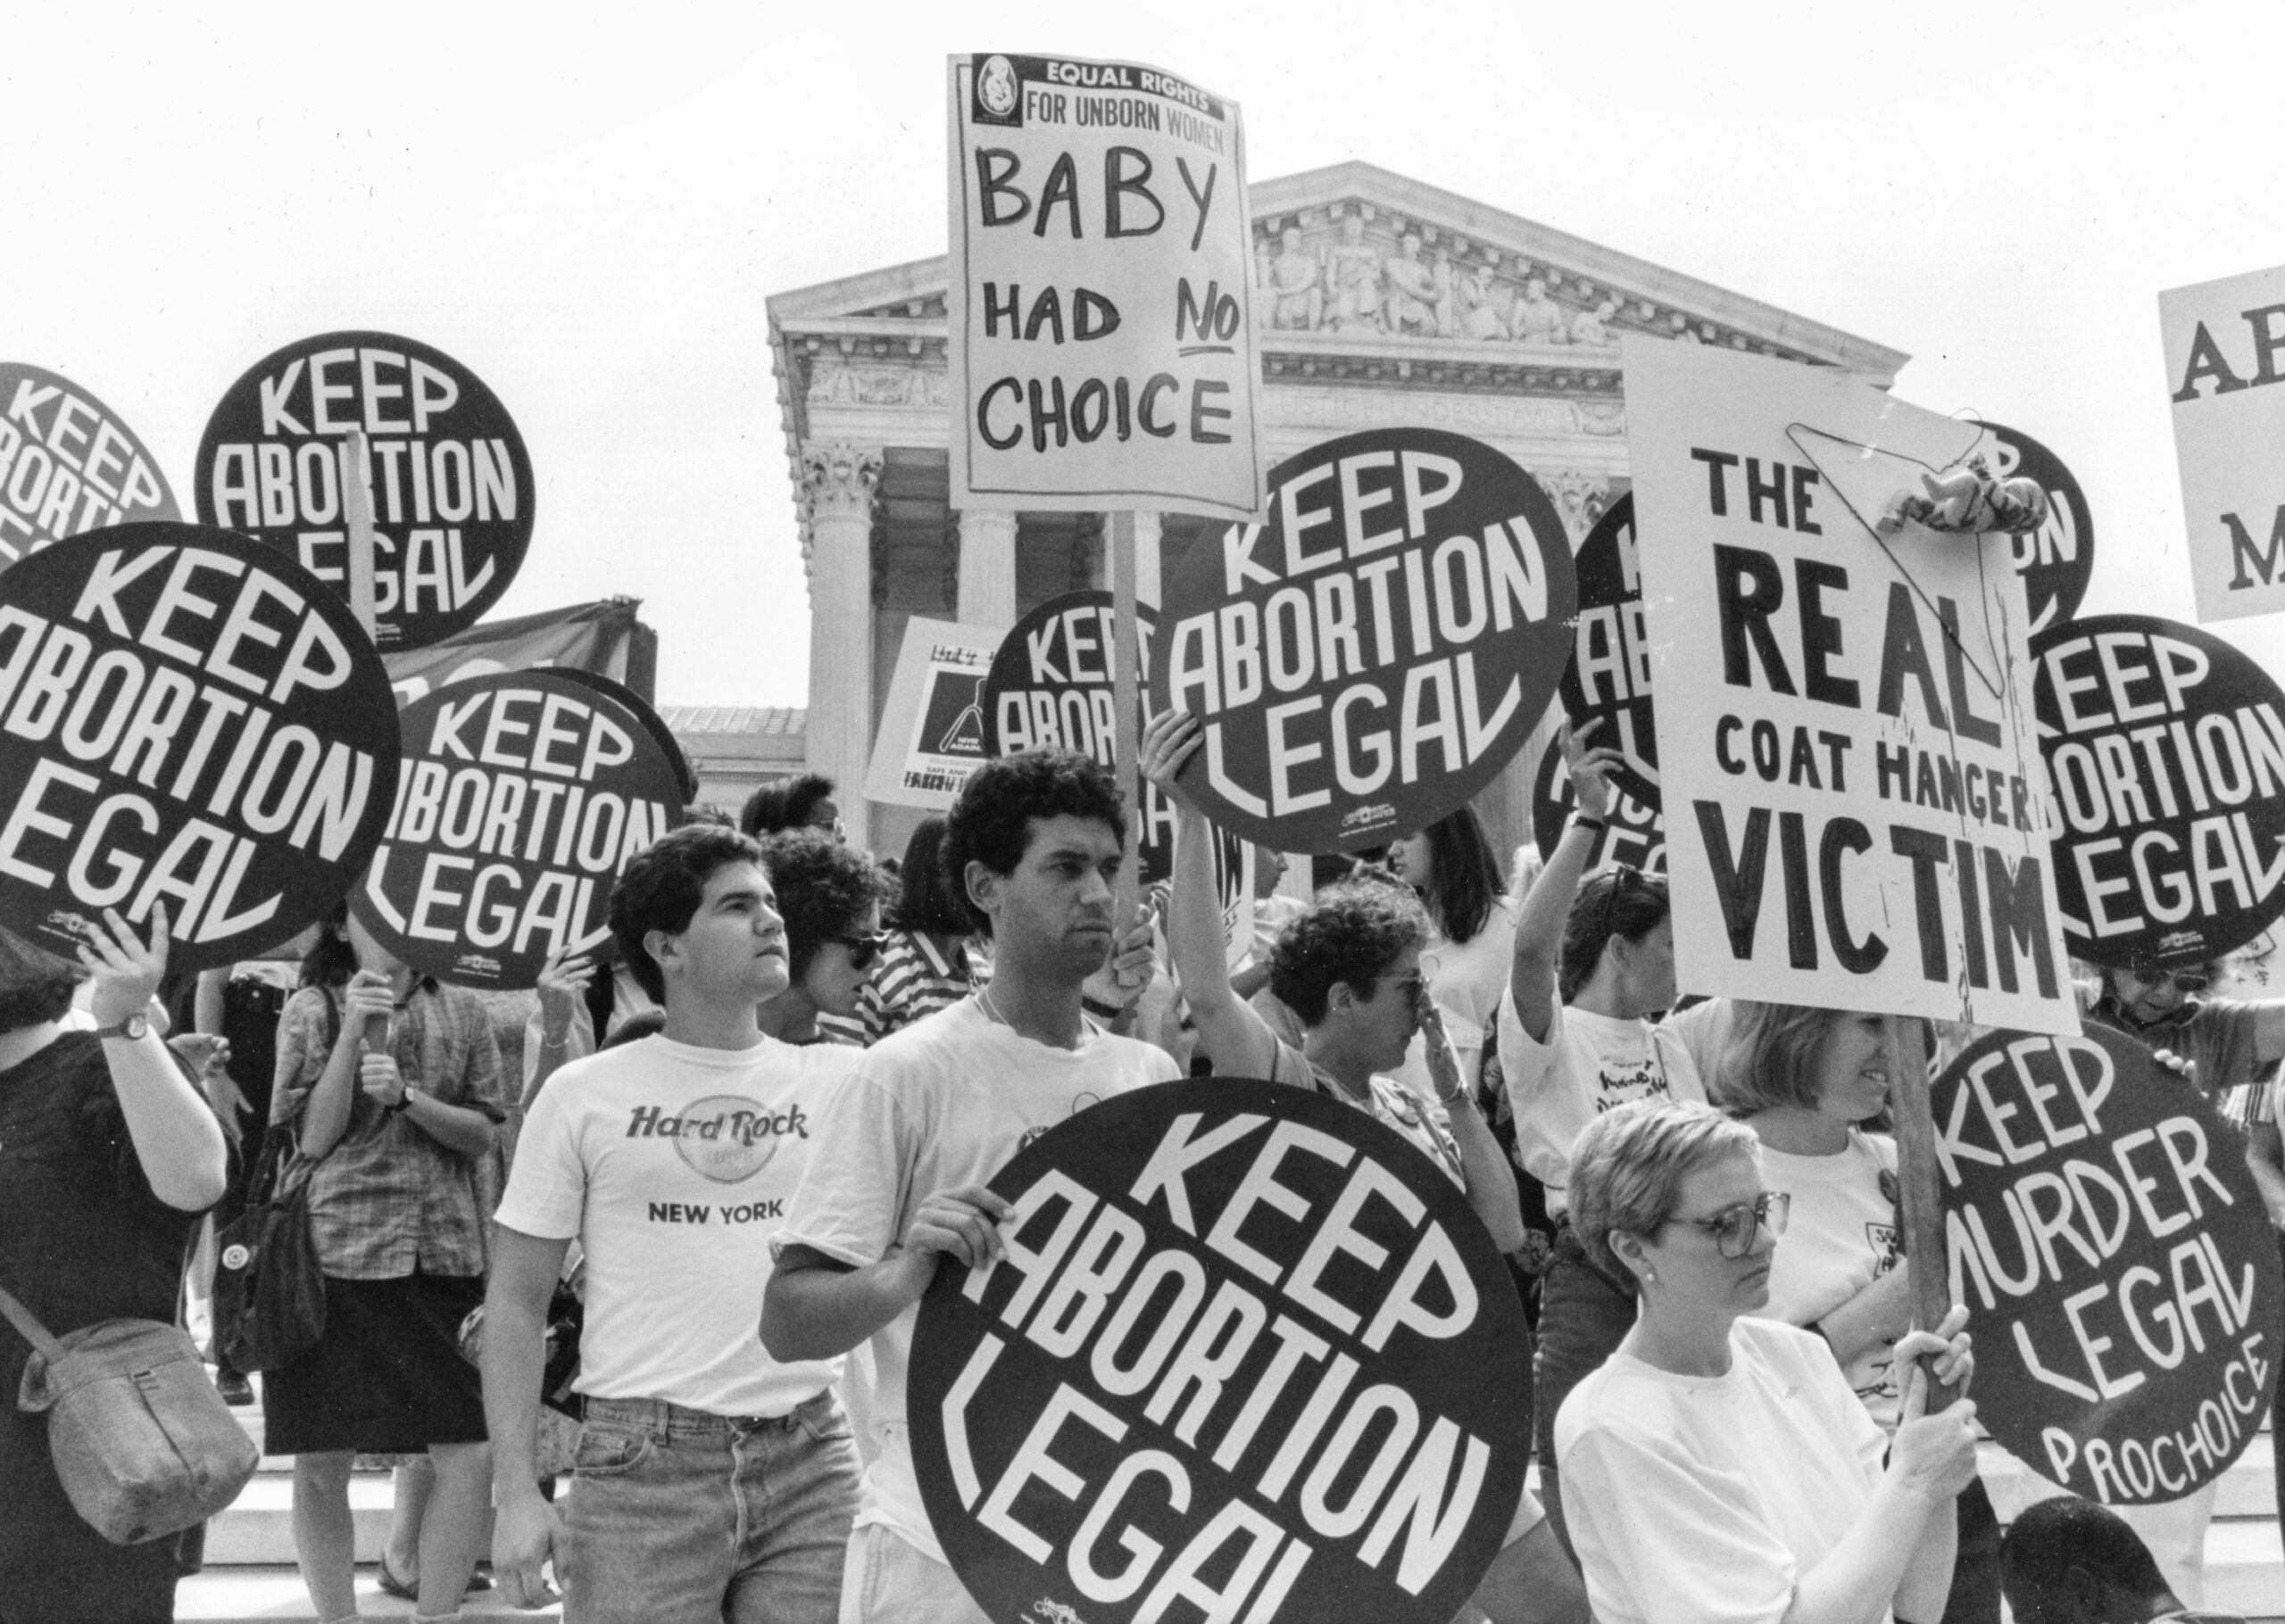 Pro-choice and anti-abortion demonstrators outside the Supreme Court in 1989, Washington DC